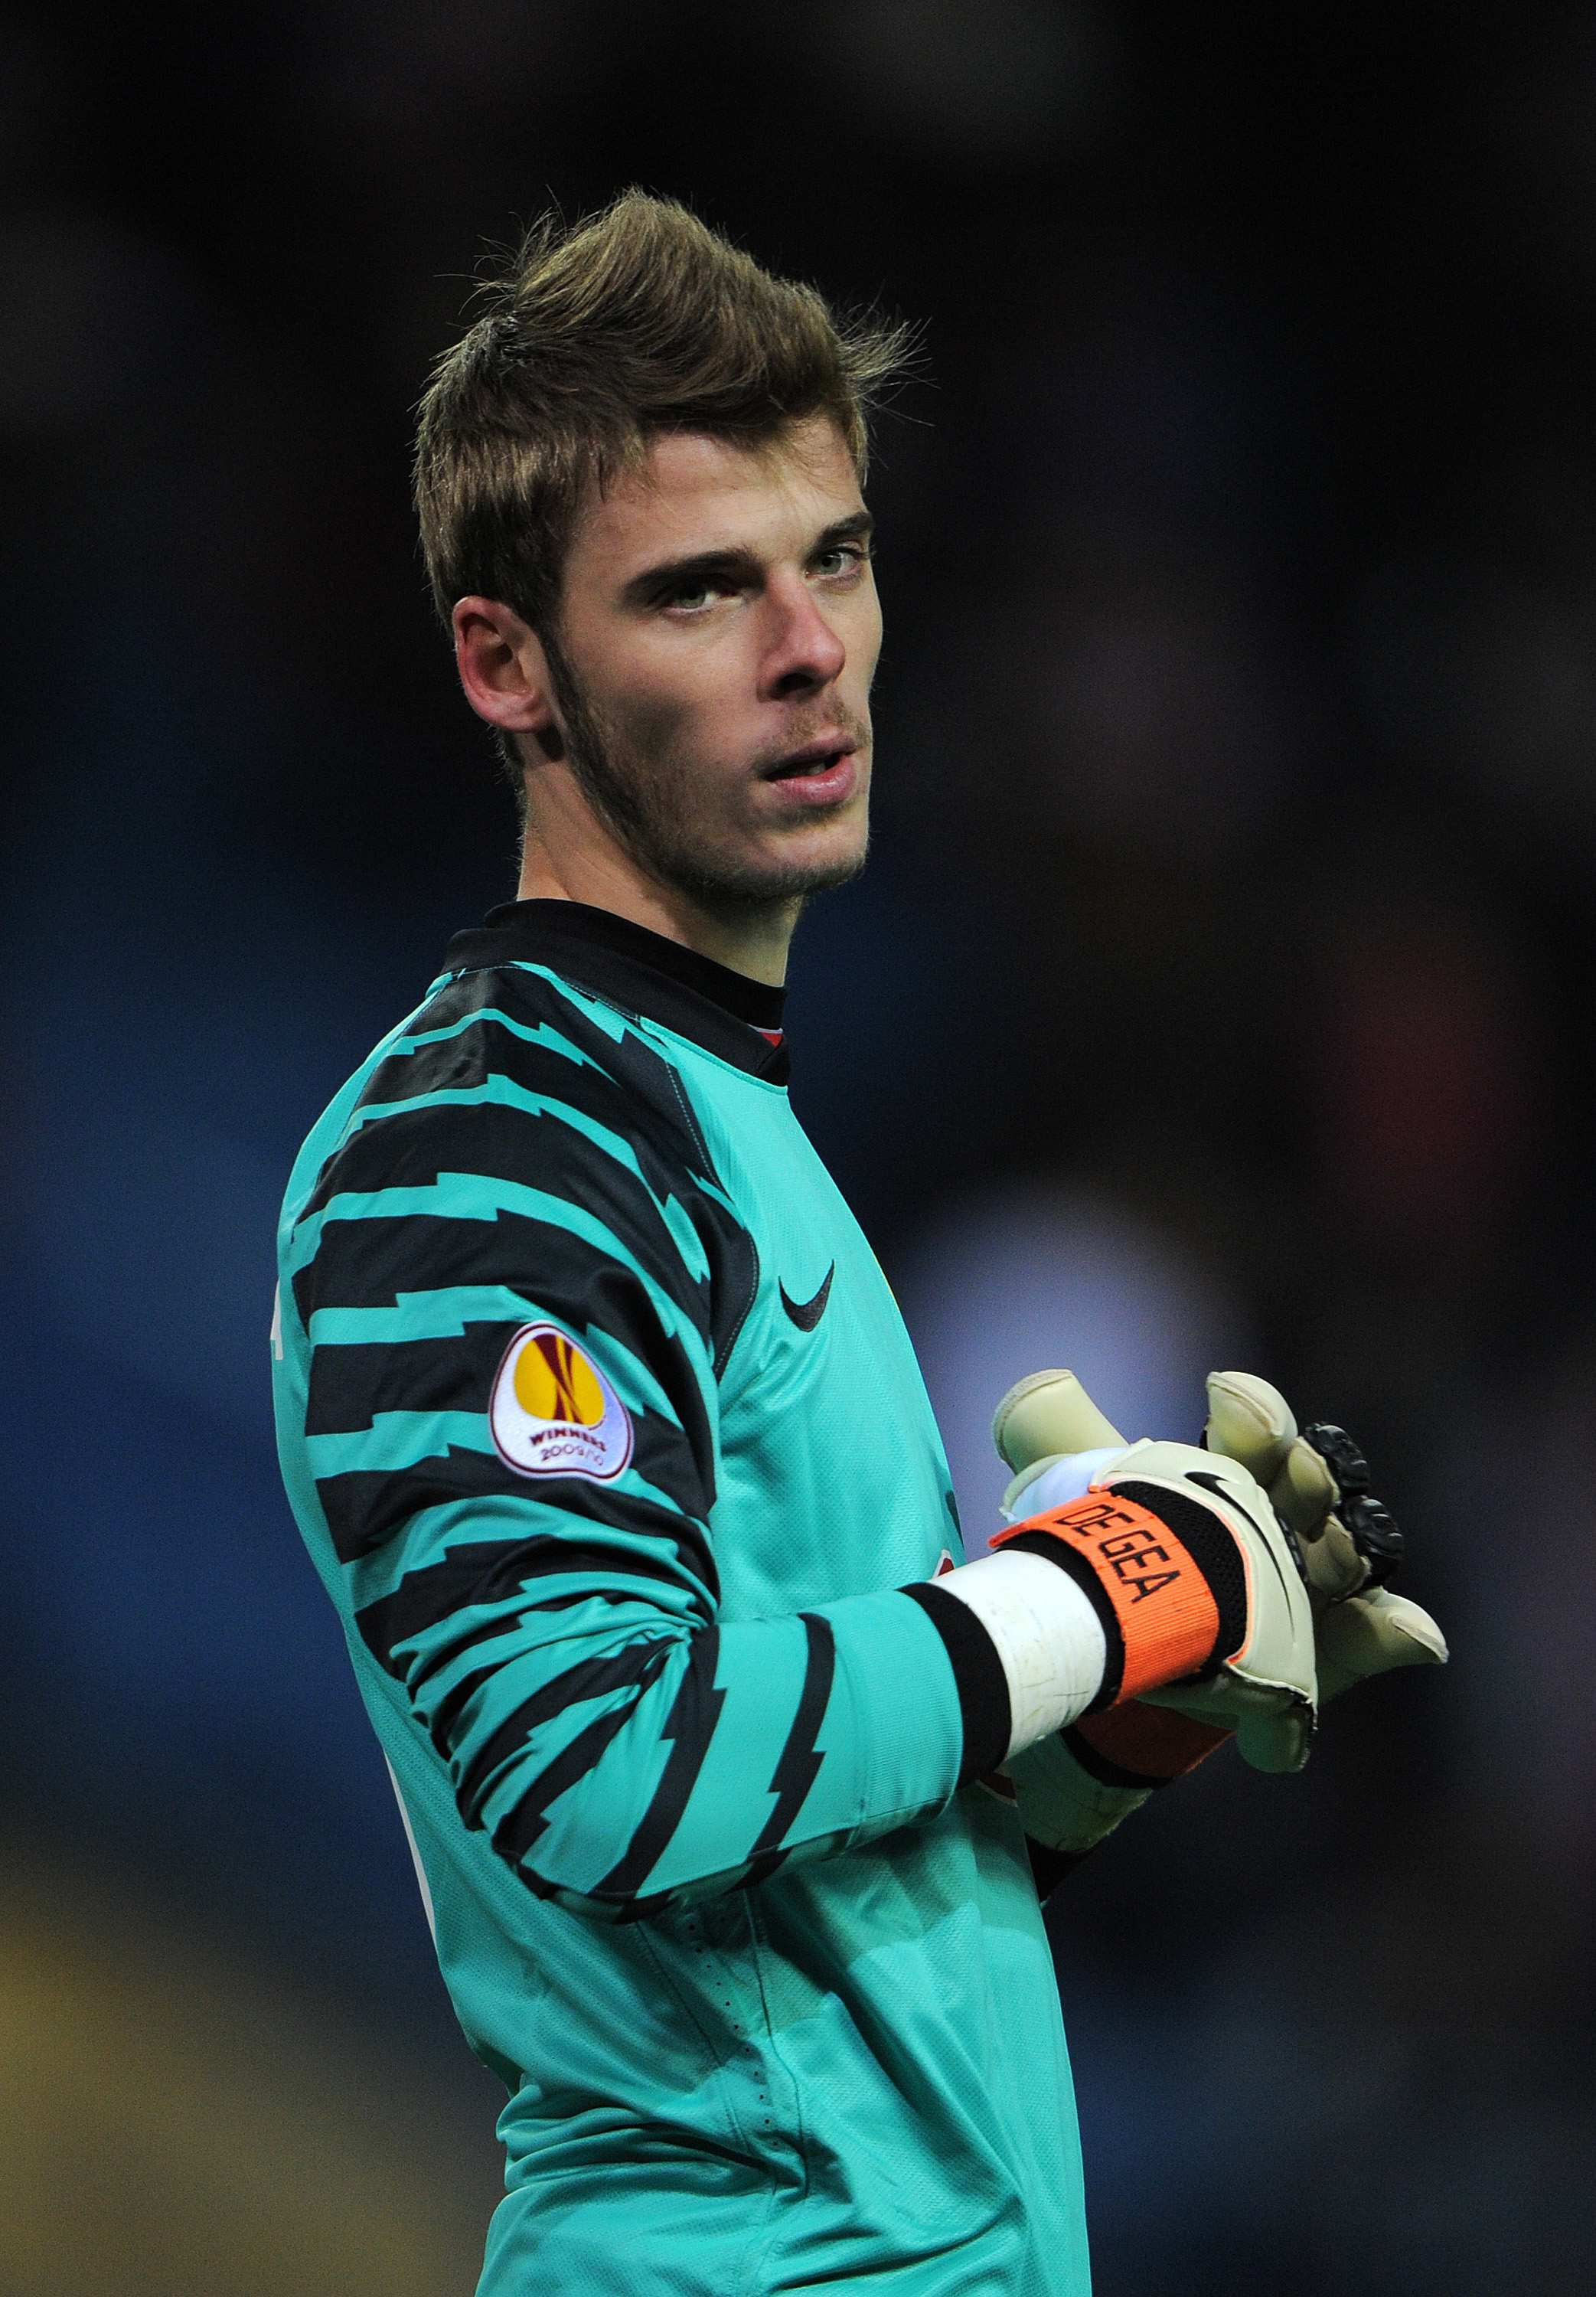 MADRID, SPAIN - DECEMBER 01:  Goalkeeper David de Gea of Atletico Madrid looks on during the Europea League match between Atletico Madrid and Aris Thessaloniki at the Vicente Calderon Stadium on December 1, 2010 in Madrid, Spain.  (Photo by Jasper Juinen/